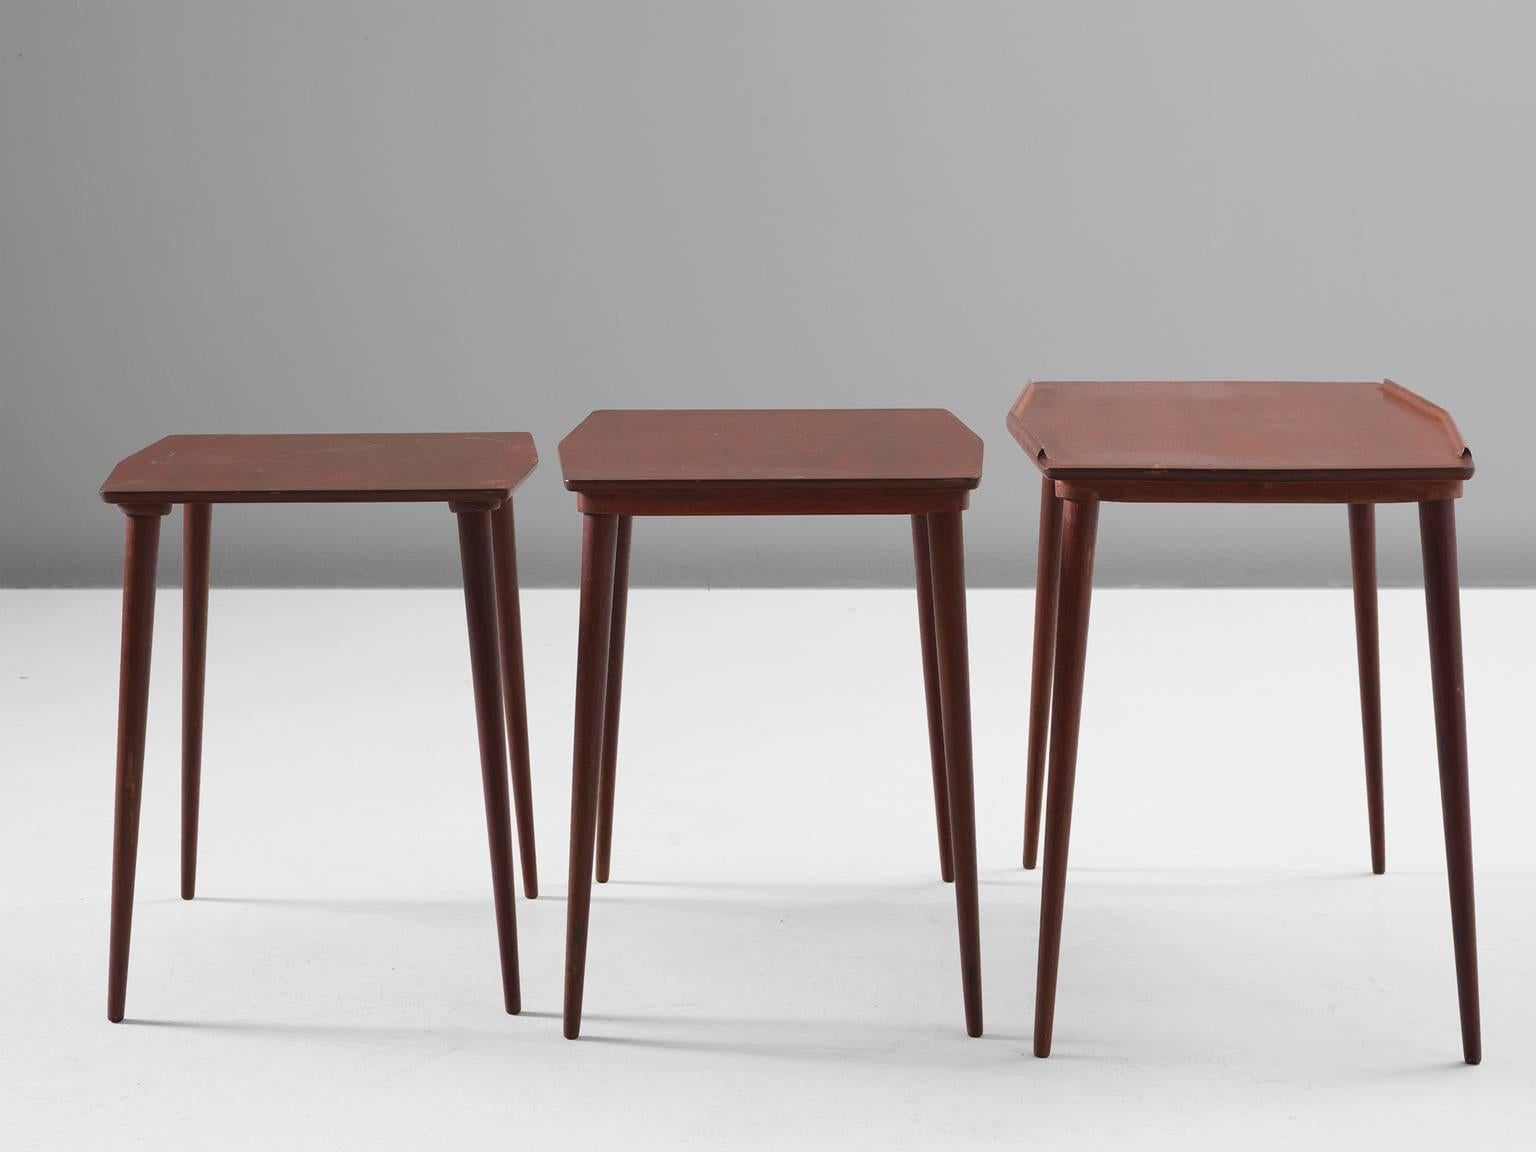 Arne Hovmand-Olsen nesting tables in teak for Mogens Kold, 1960s, Denmark.

This lovely set of three nesting tables is both functional and rich at the same time. The set is lightweight and has beautiful slender tapered legs. The tabletop have small